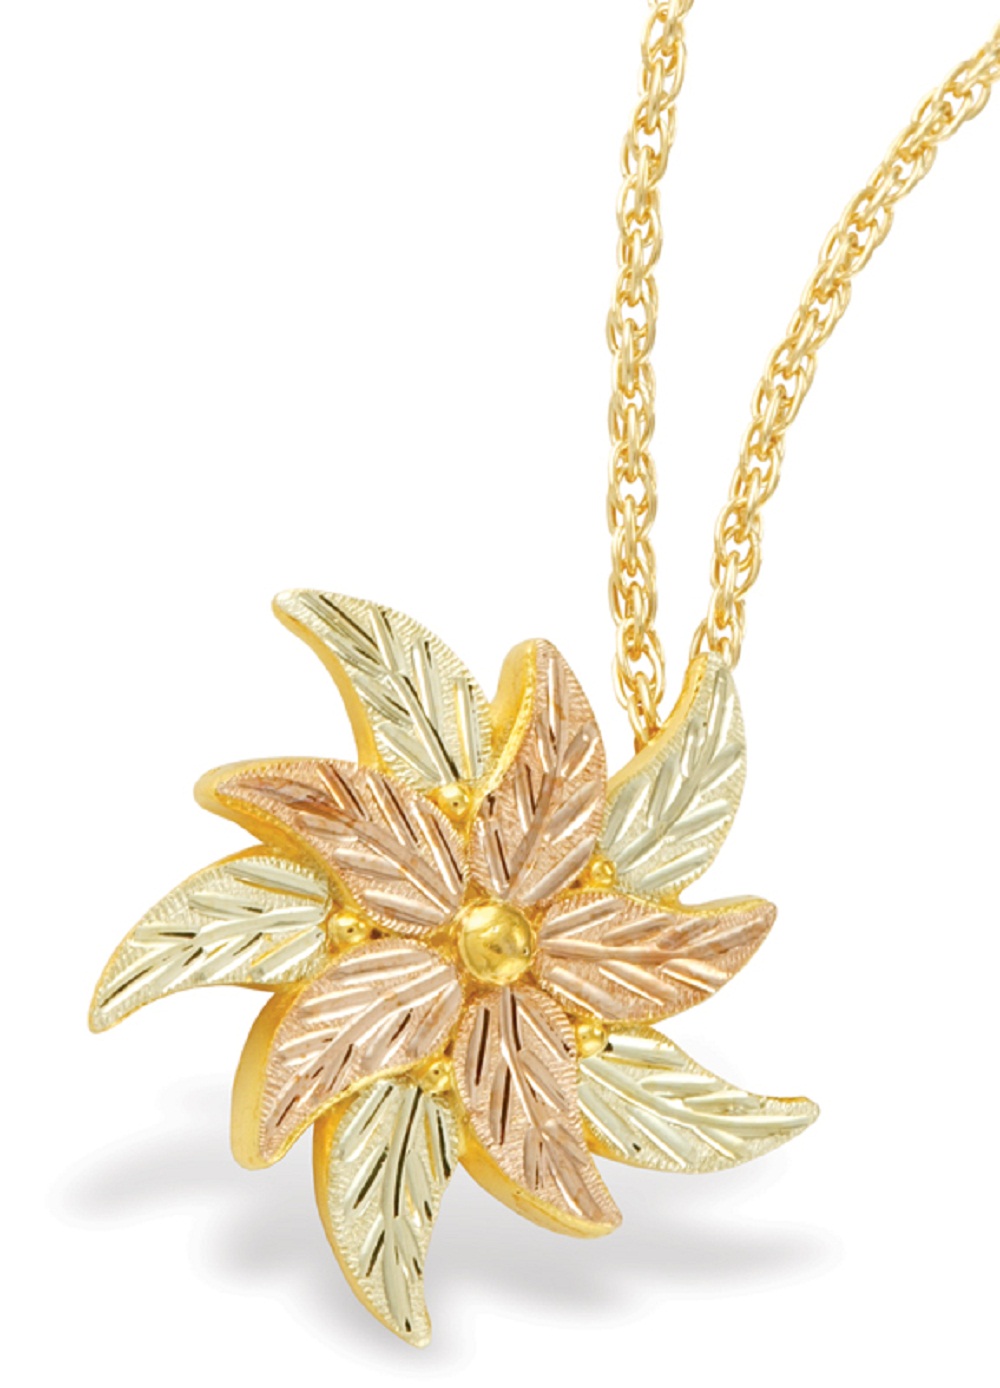 Black Hills Gold Necklace with Floral Pendant. 